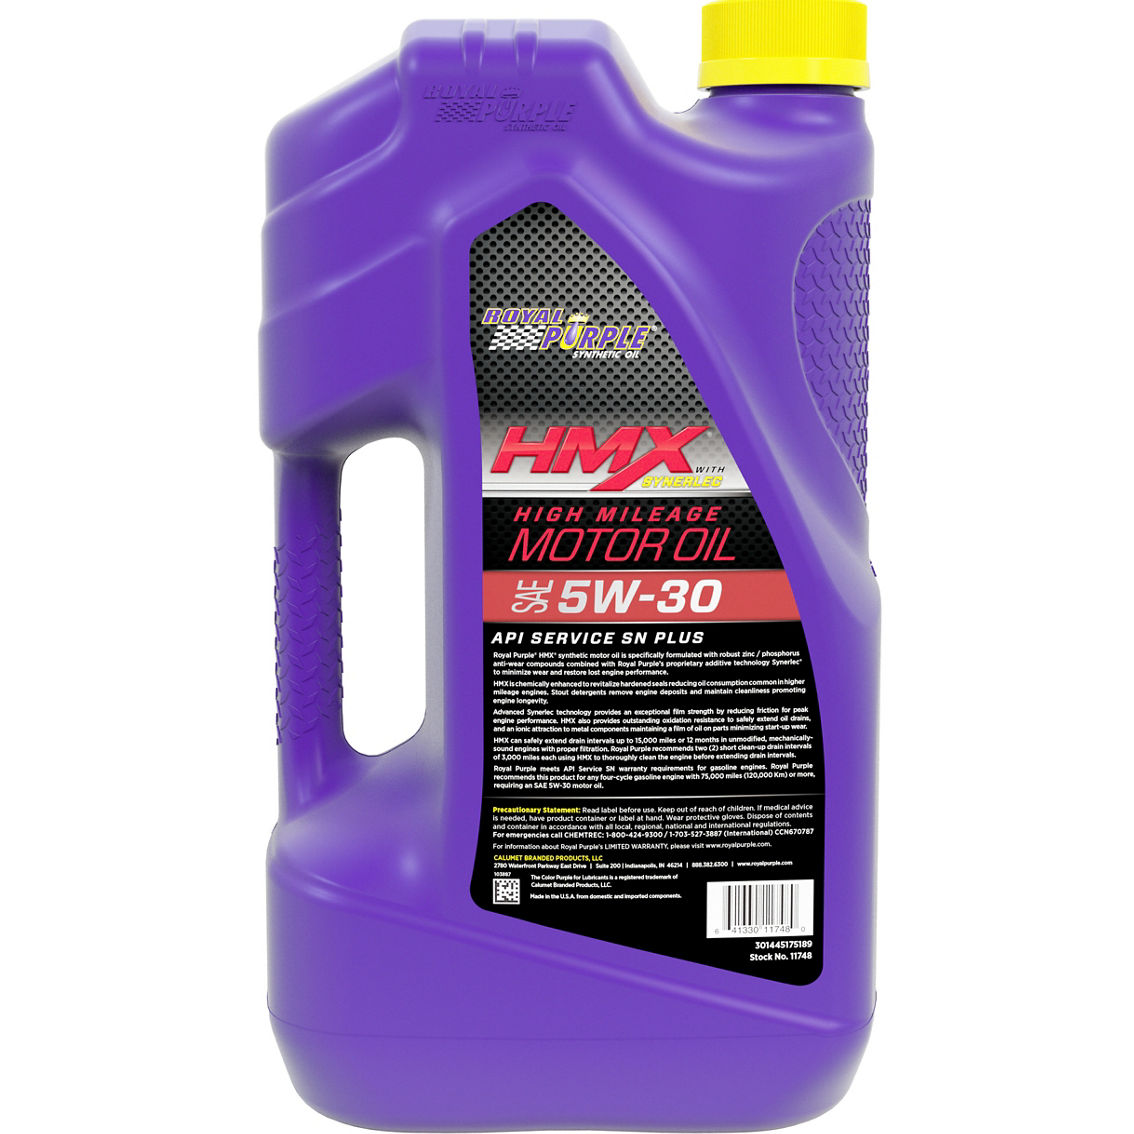 Royal Purple HMX 5W-30 High Mileage Synthetic Motor Oil 5 qt. - Image 2 of 2